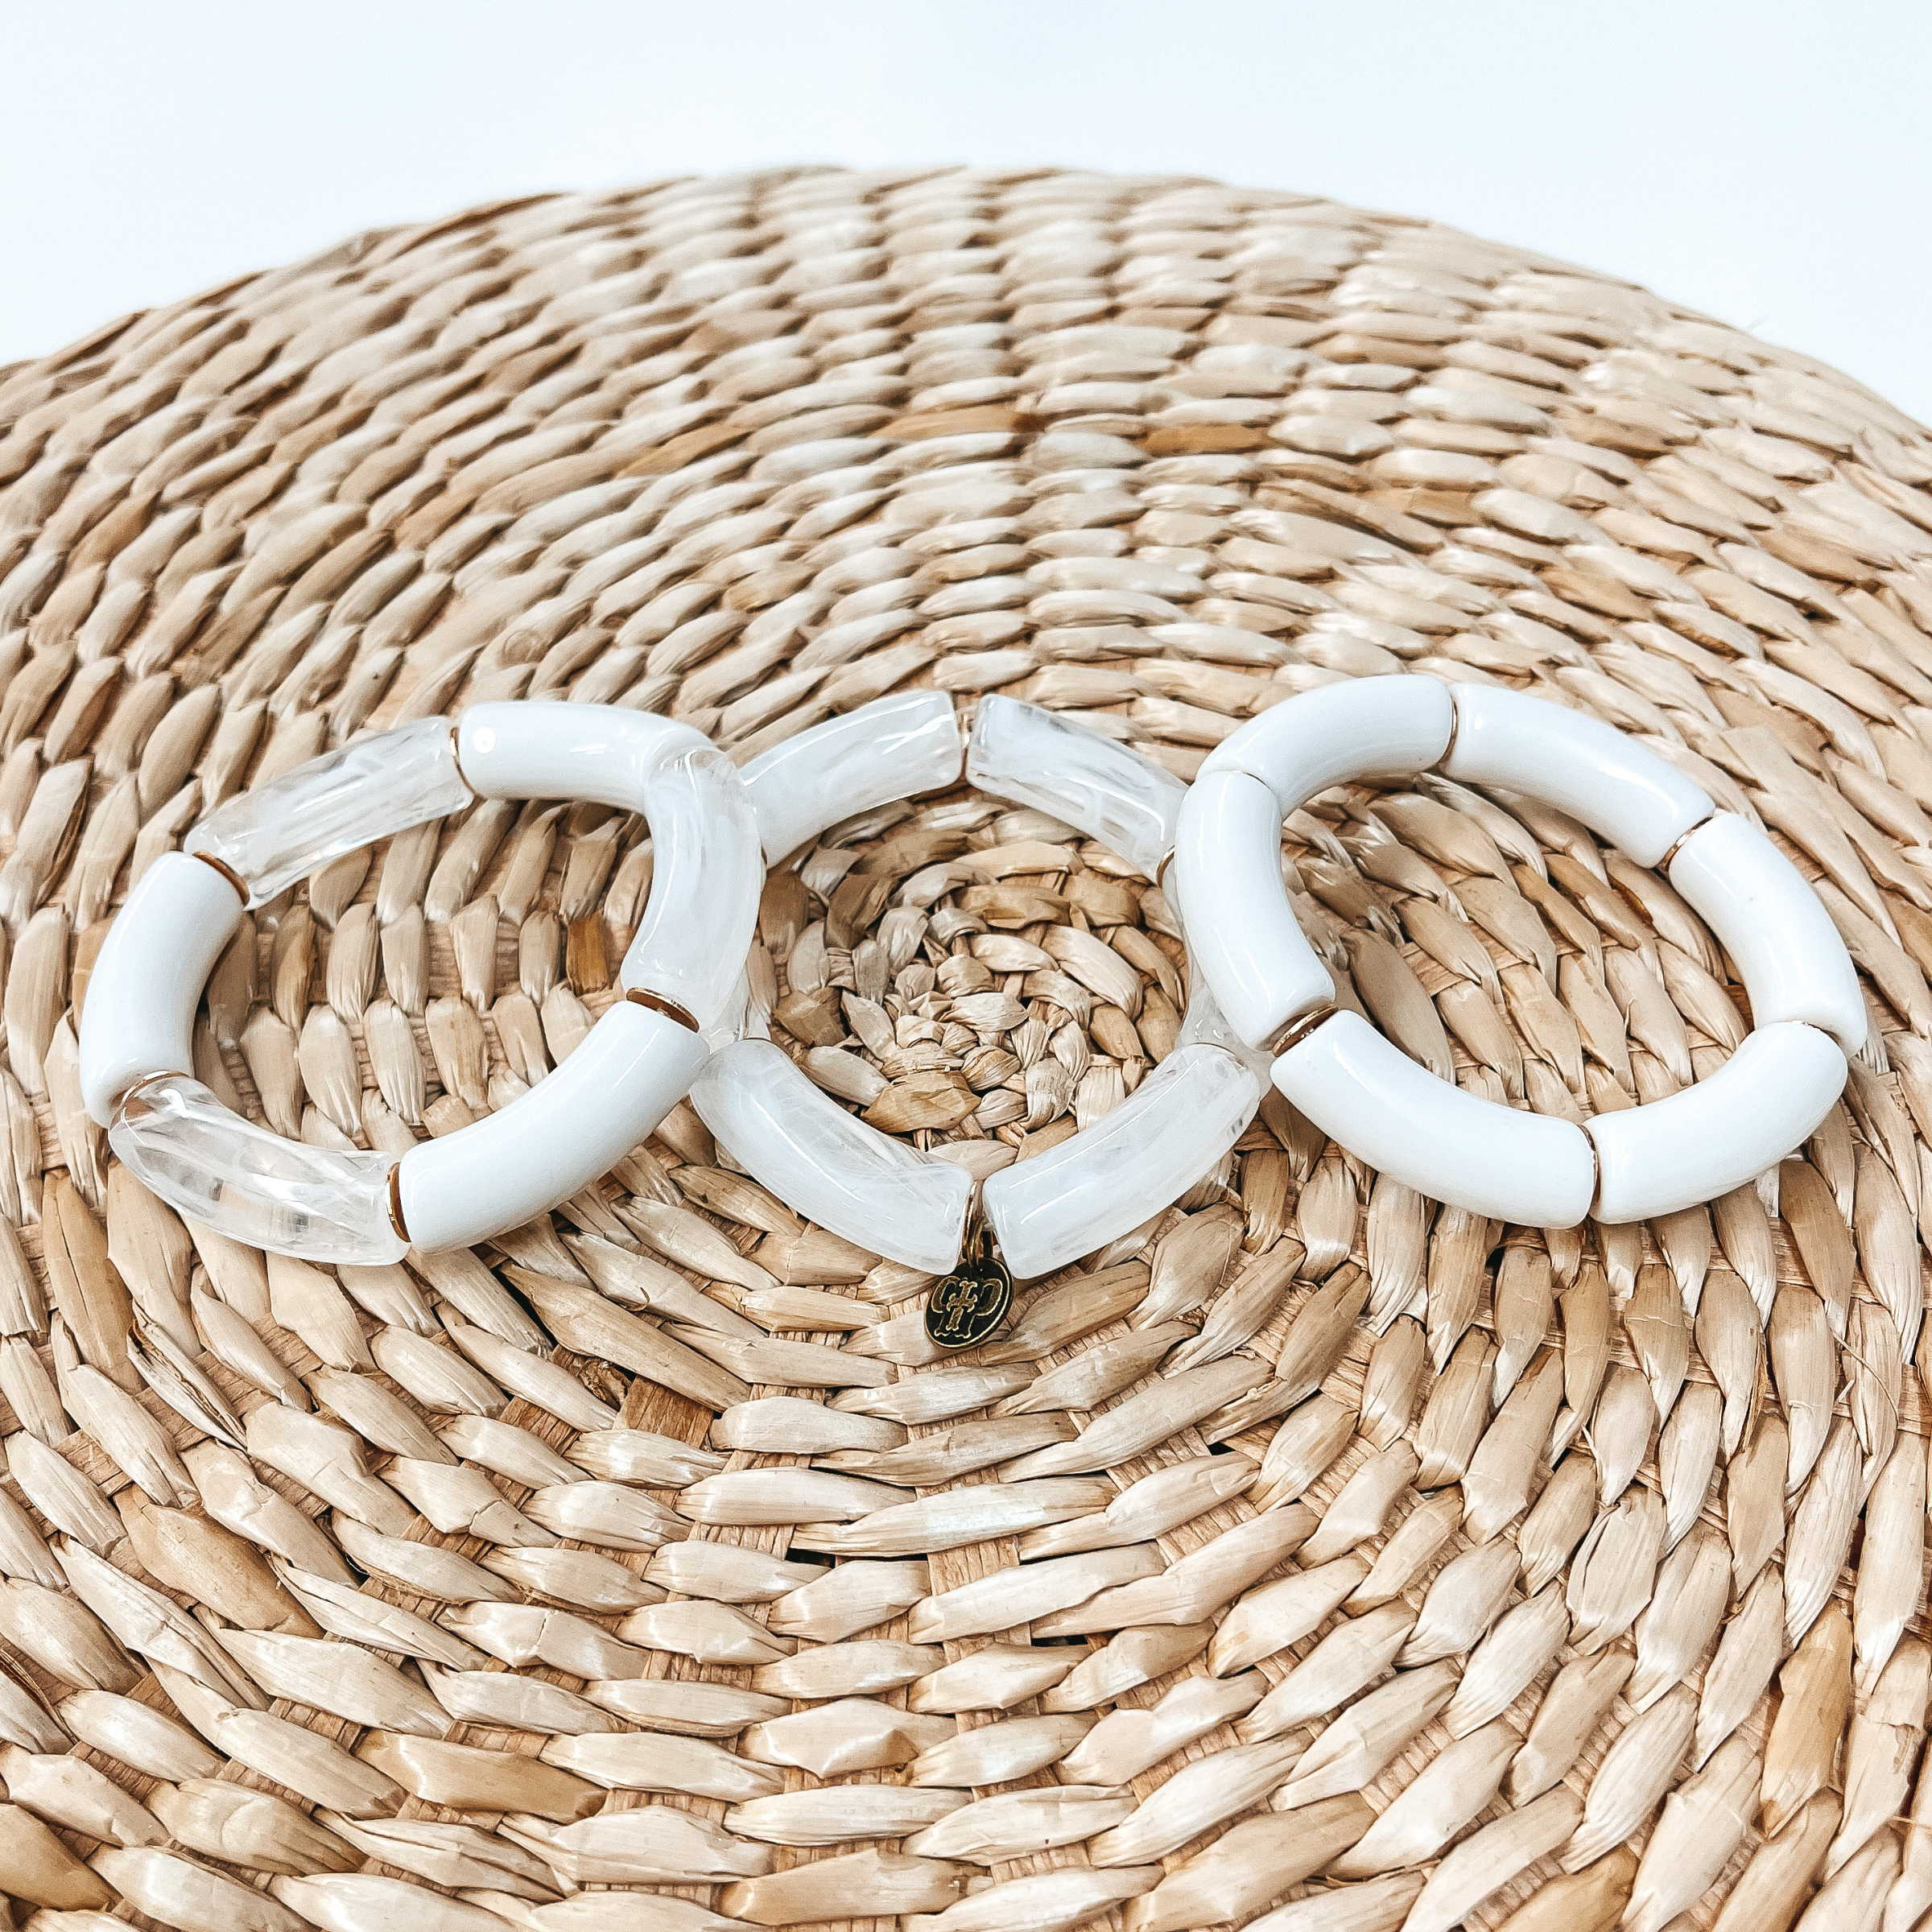 These are three acrylic tube bracelets in white  with different acrylic patterns and gold spacers. The bracelet in the  left is a mix of solid white and marble tubes. The middle one is a mix of clear and white marble tubes.  The right one is all solid white tubes. Taken on top of a bamboo stool and white background.